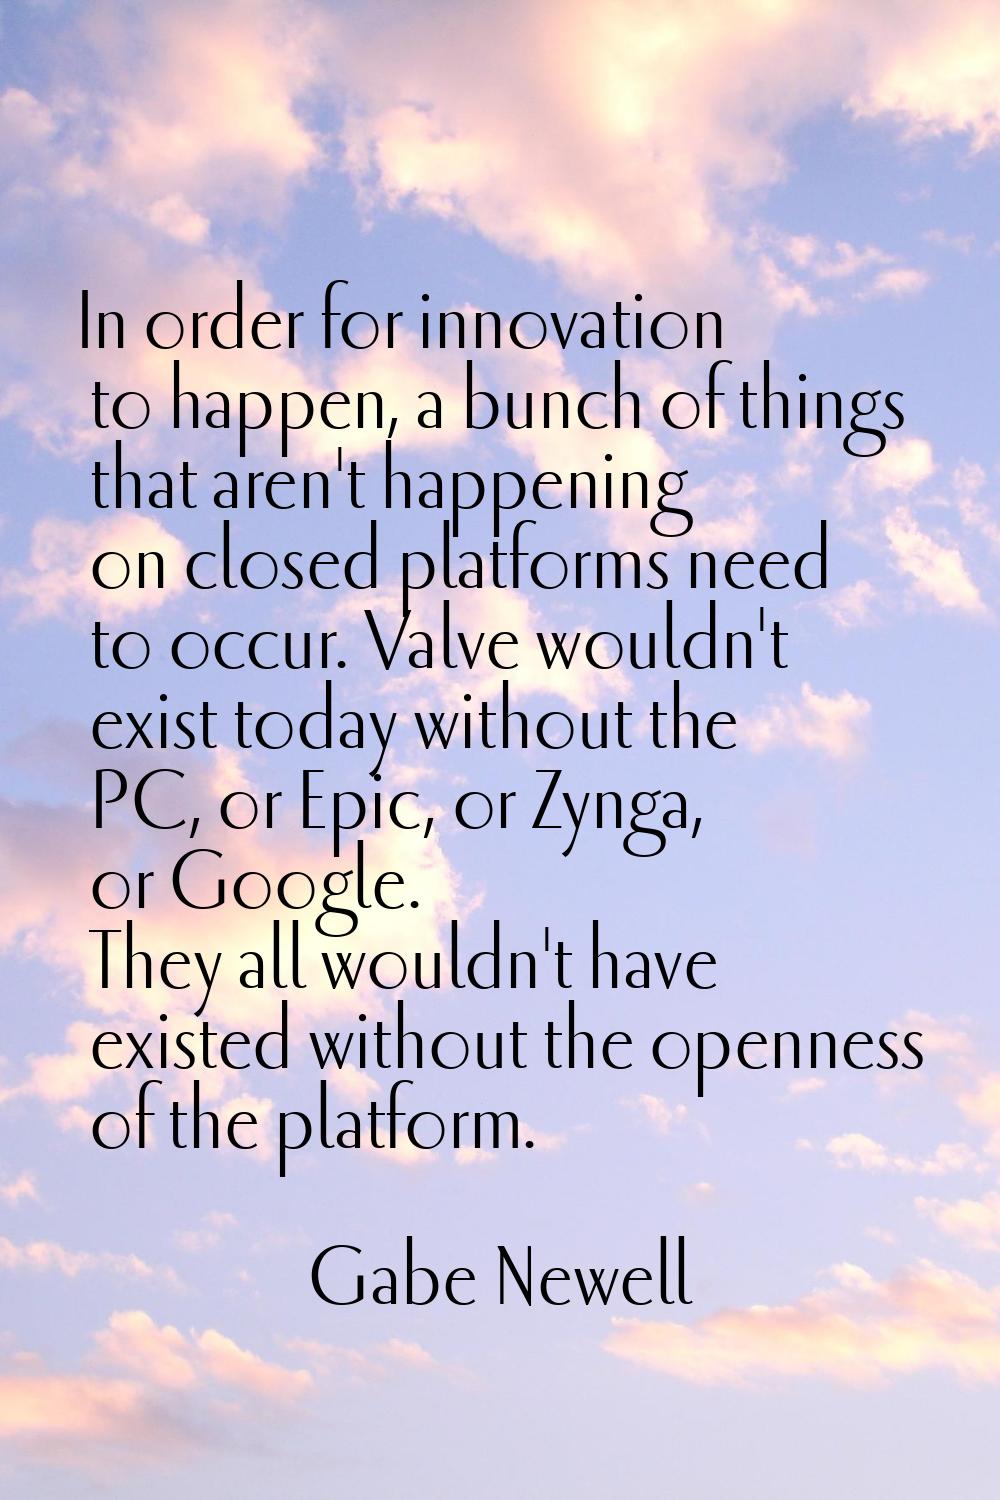 In order for innovation to happen, a bunch of things that aren't happening on closed platforms need